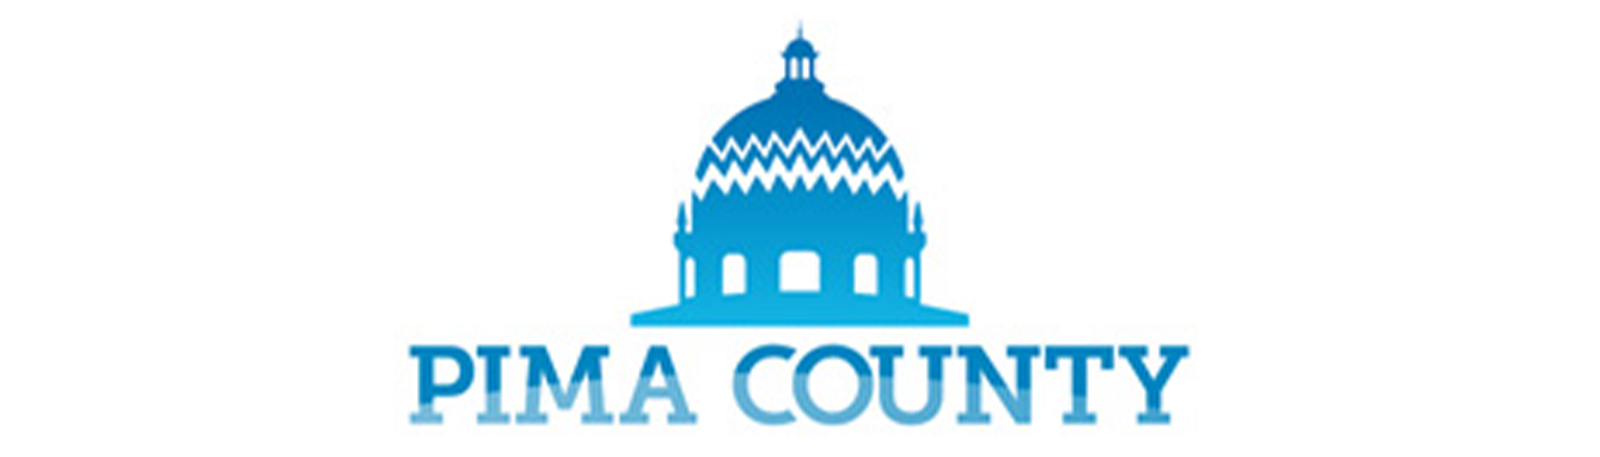 Pima County enrollees landing page